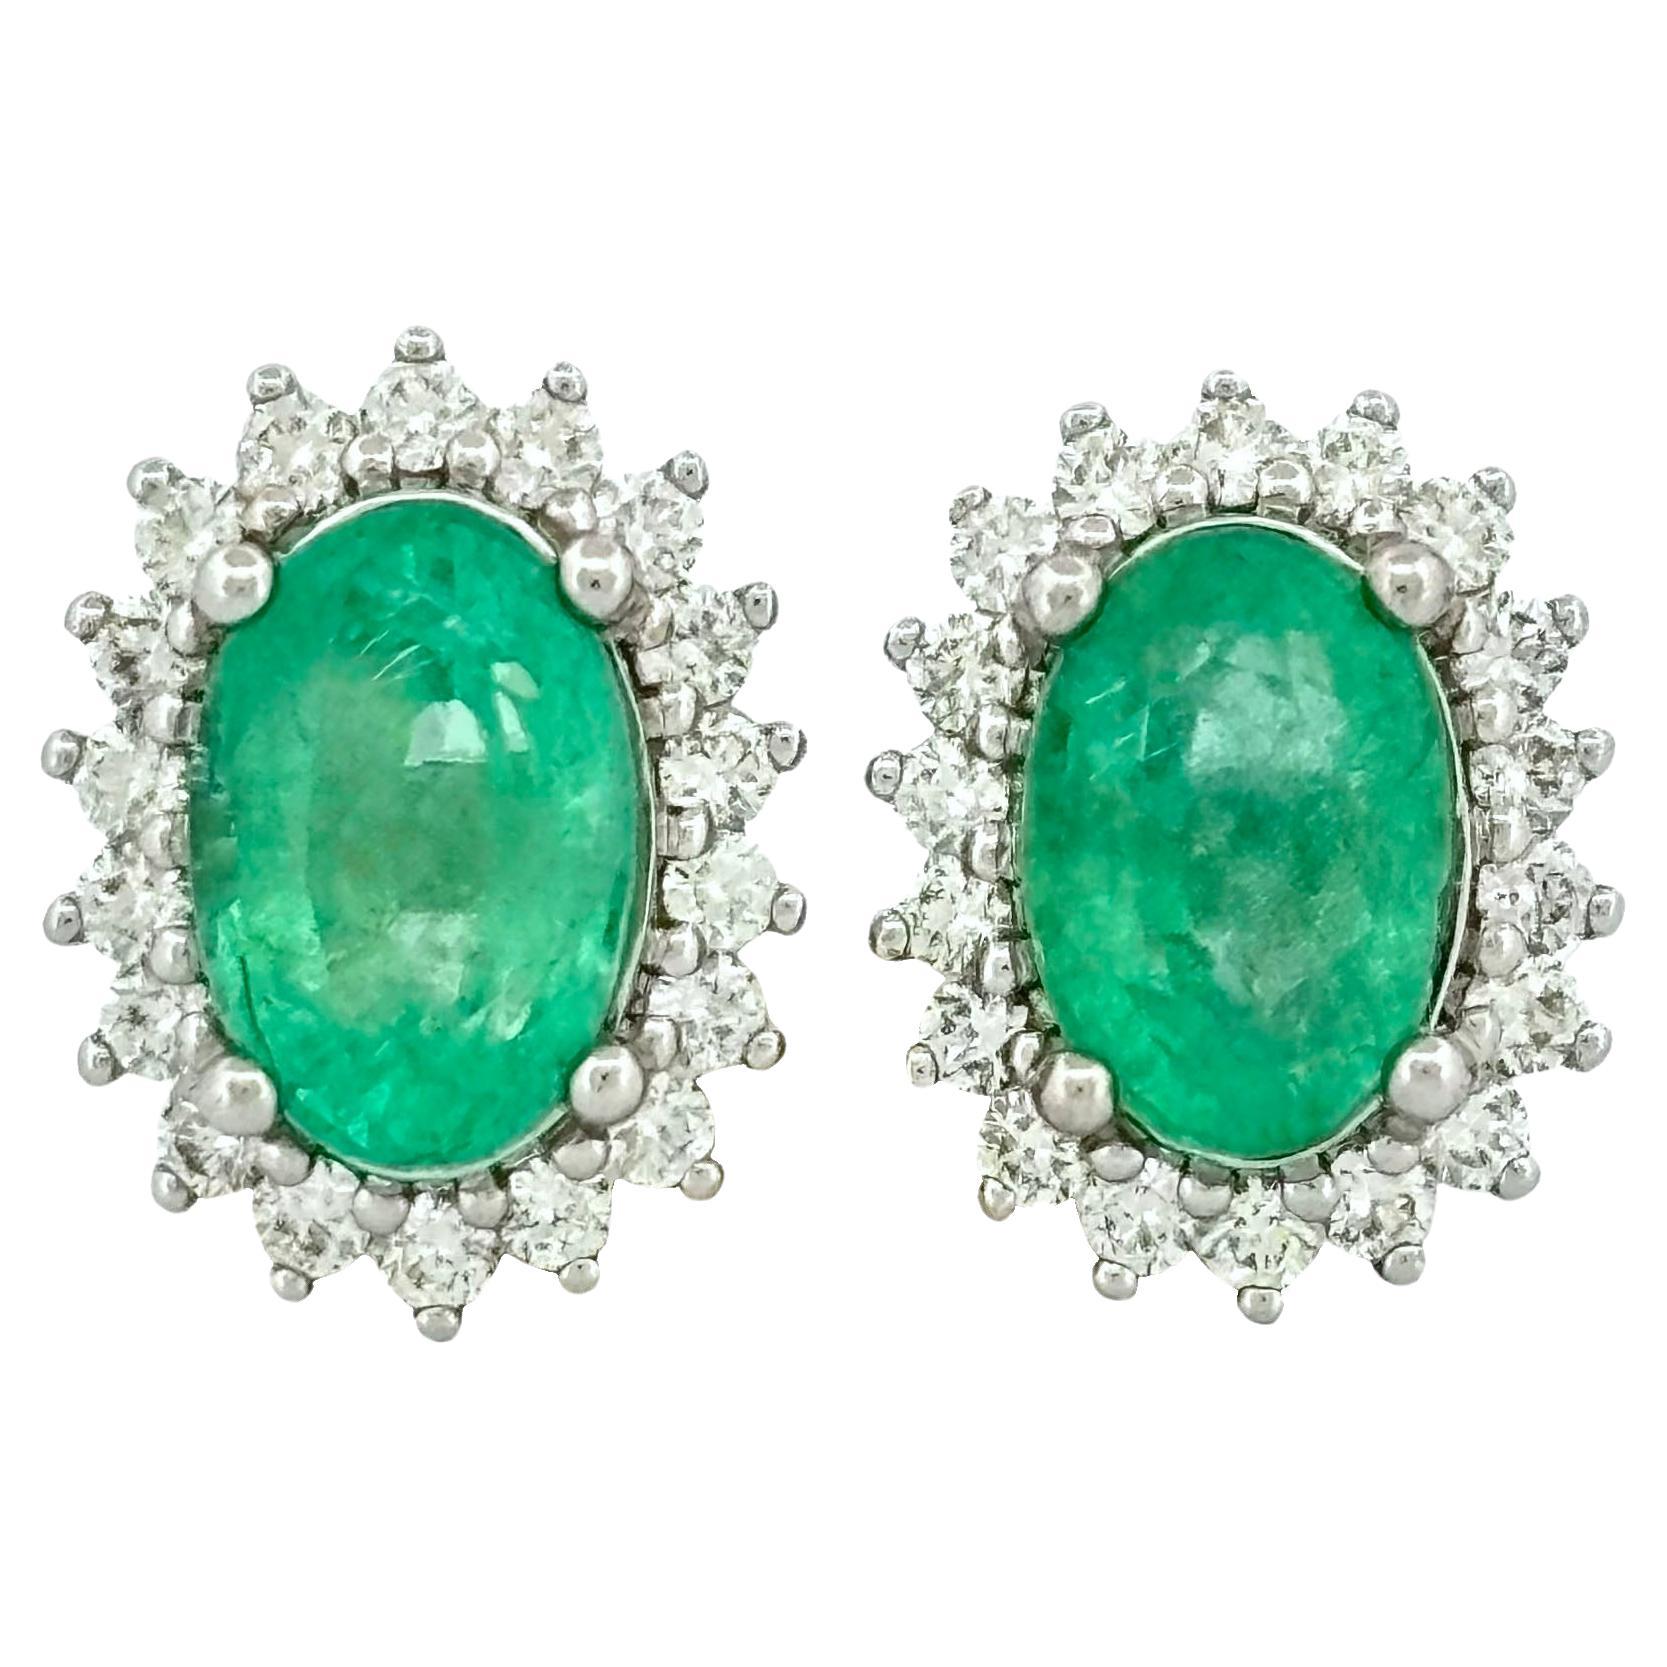  2.96 Carat Emerald Stud Earrings with Natural Diamonds in 18K White Gold 